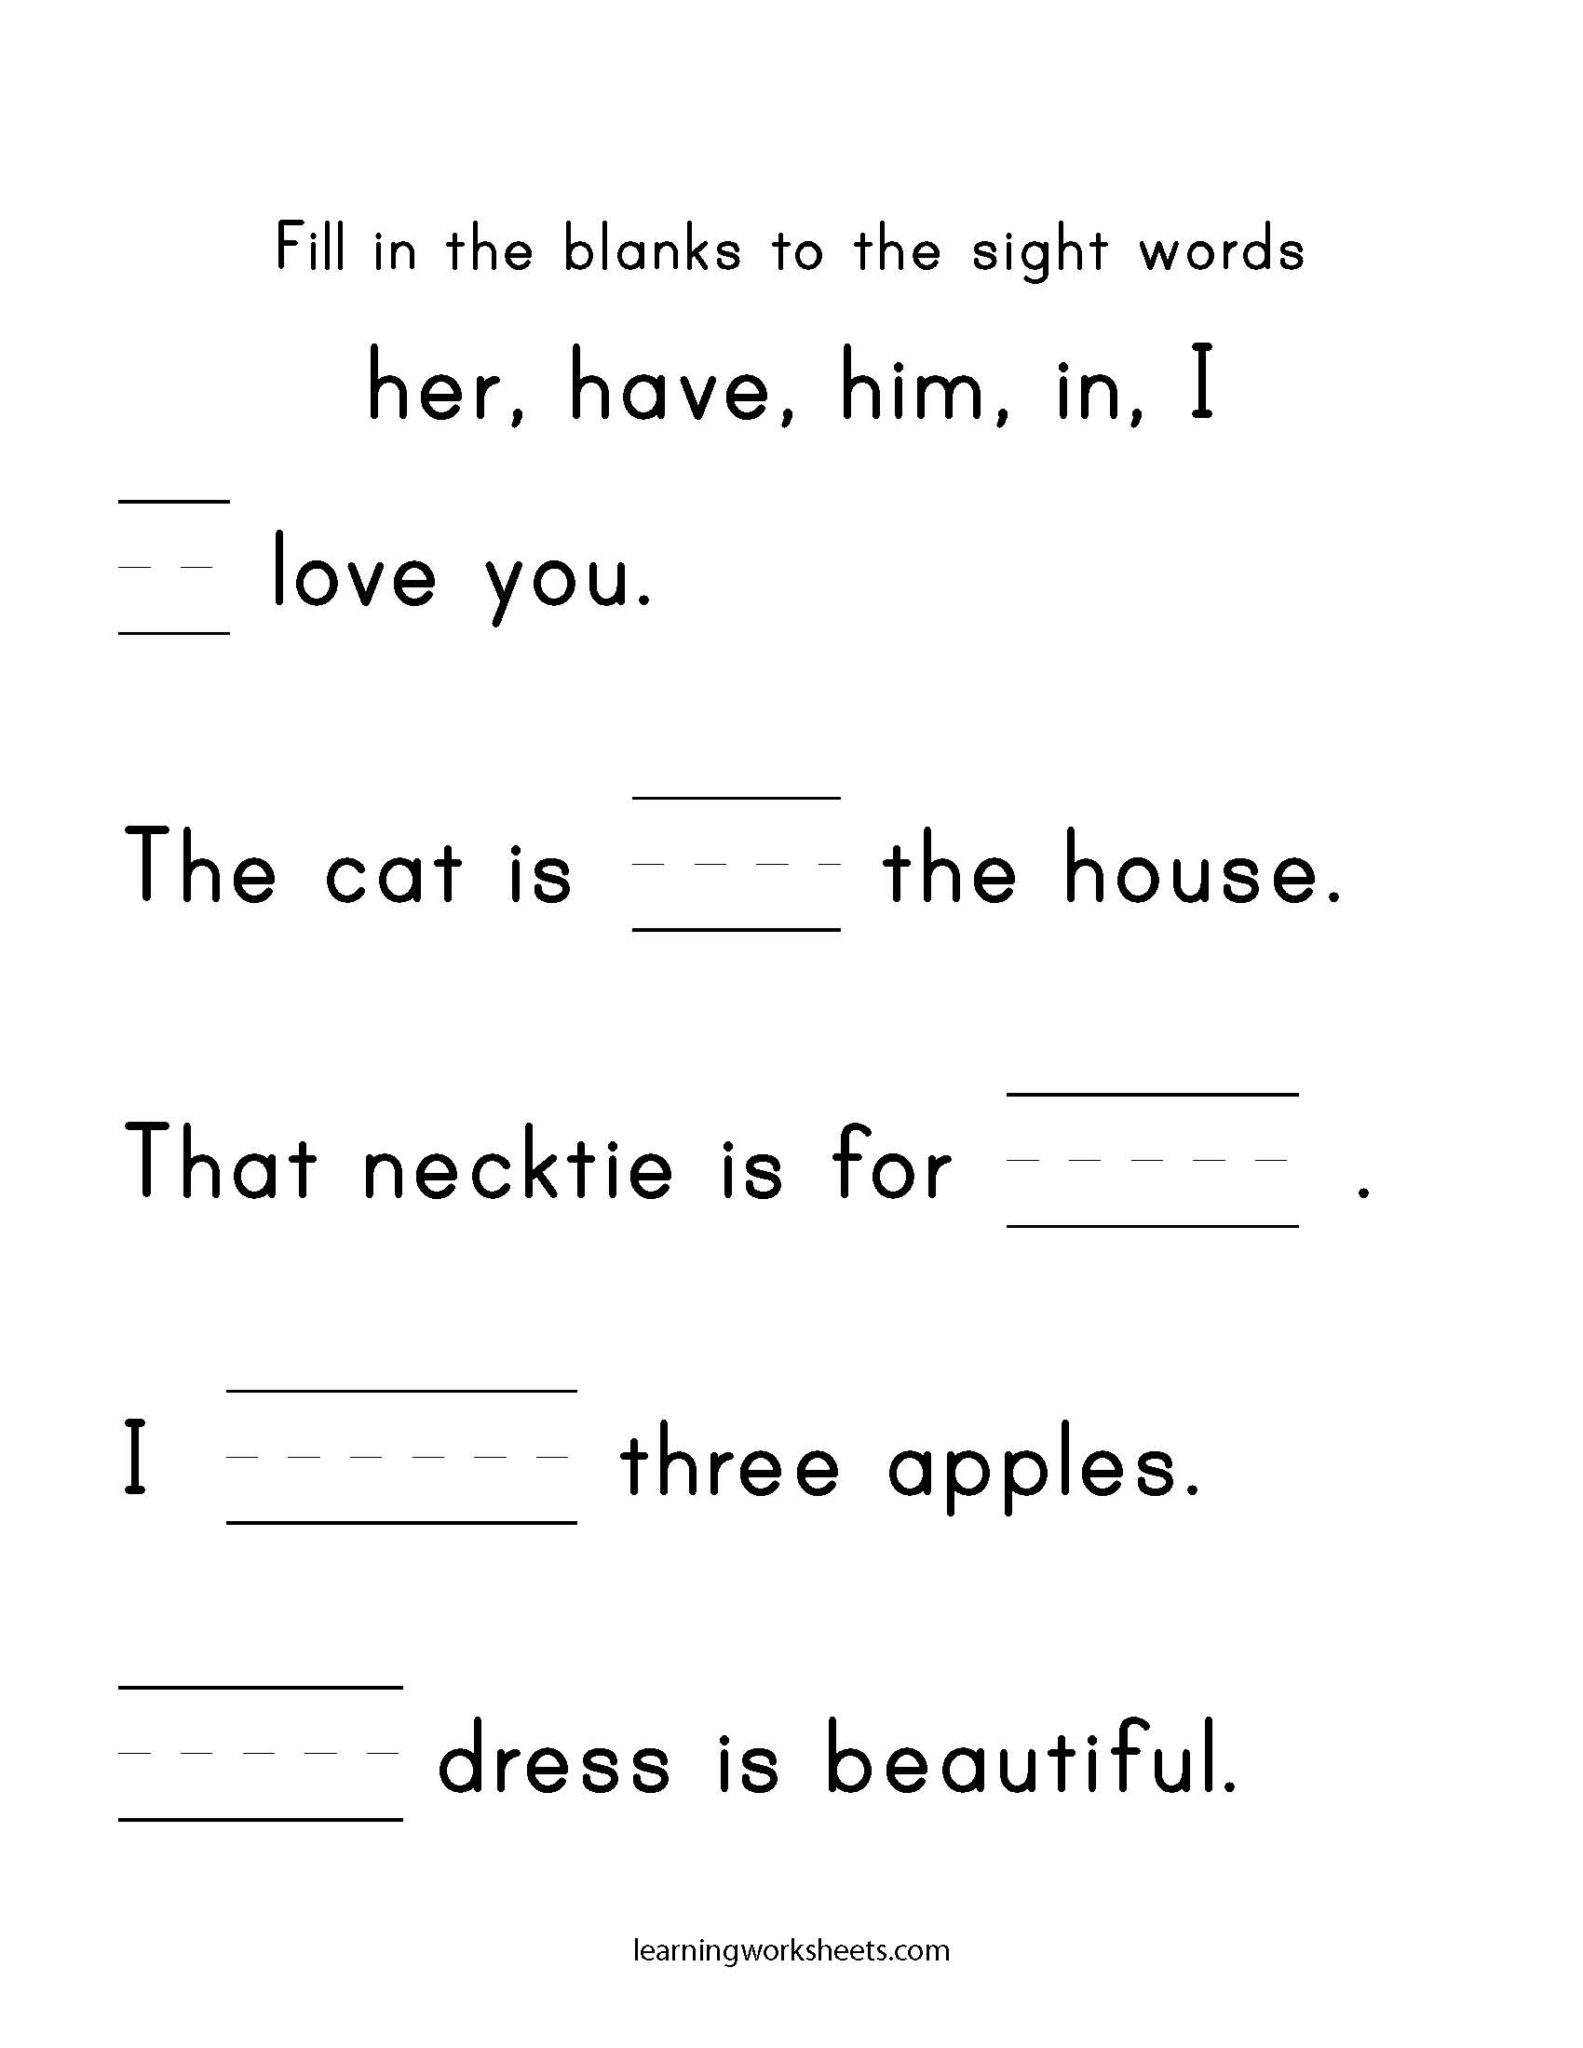 Fill in the blanks to the sight words her, have, him, in, I - learning